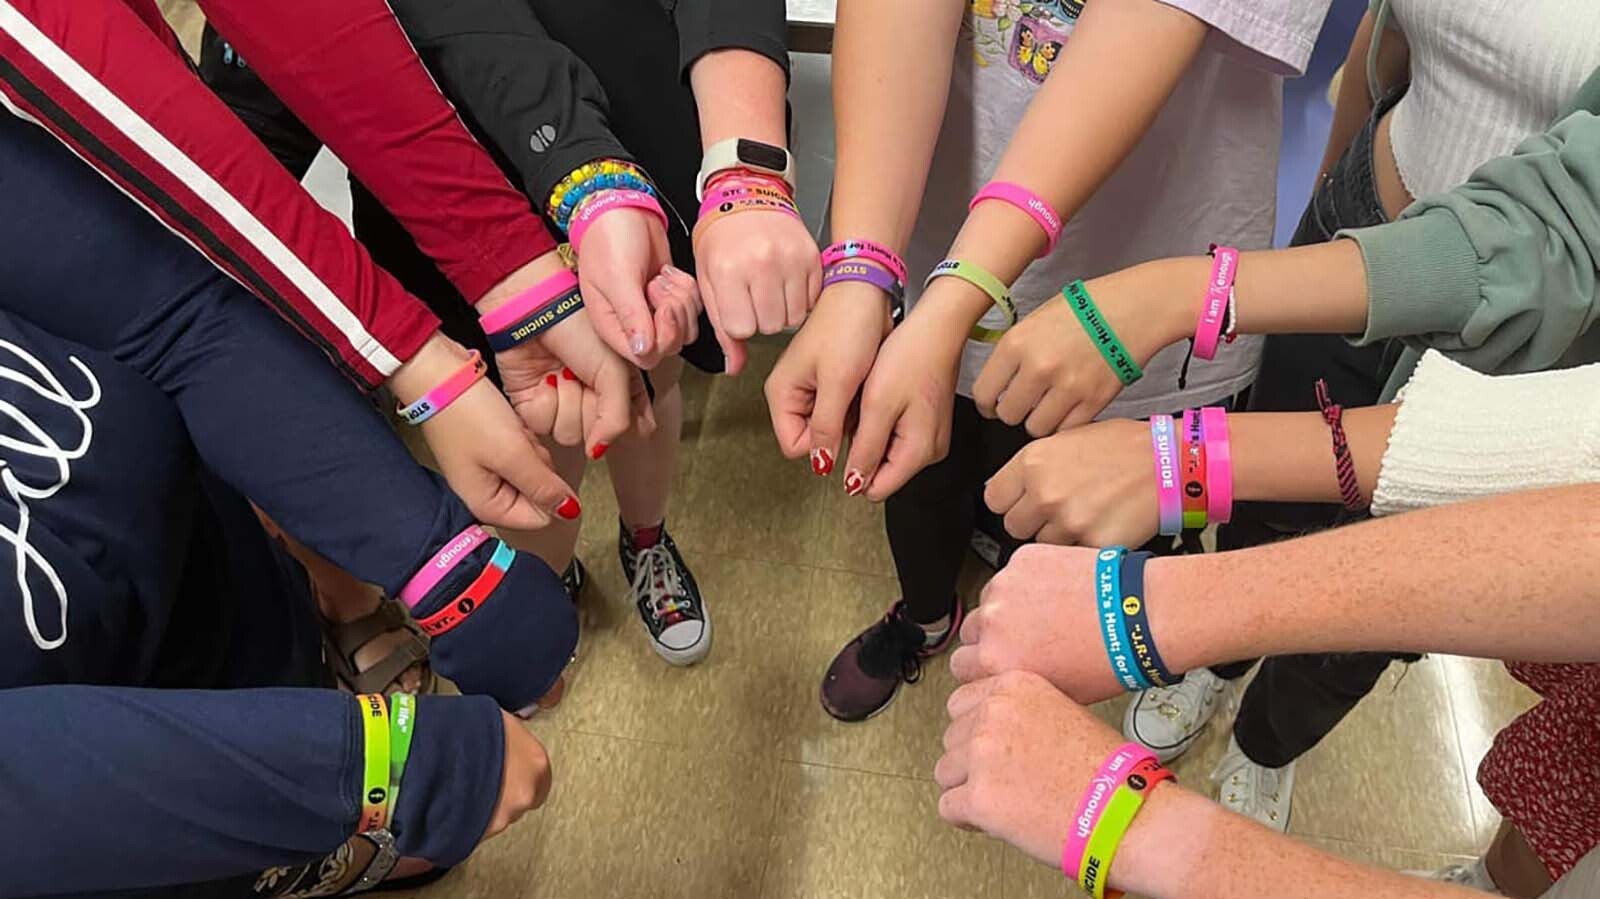 As part of J.R.’s Hunt for Life, the organization has sent thousands of bracelets around the world with the message: “J.R.’s Hunt for Life – Stop Suicide.”